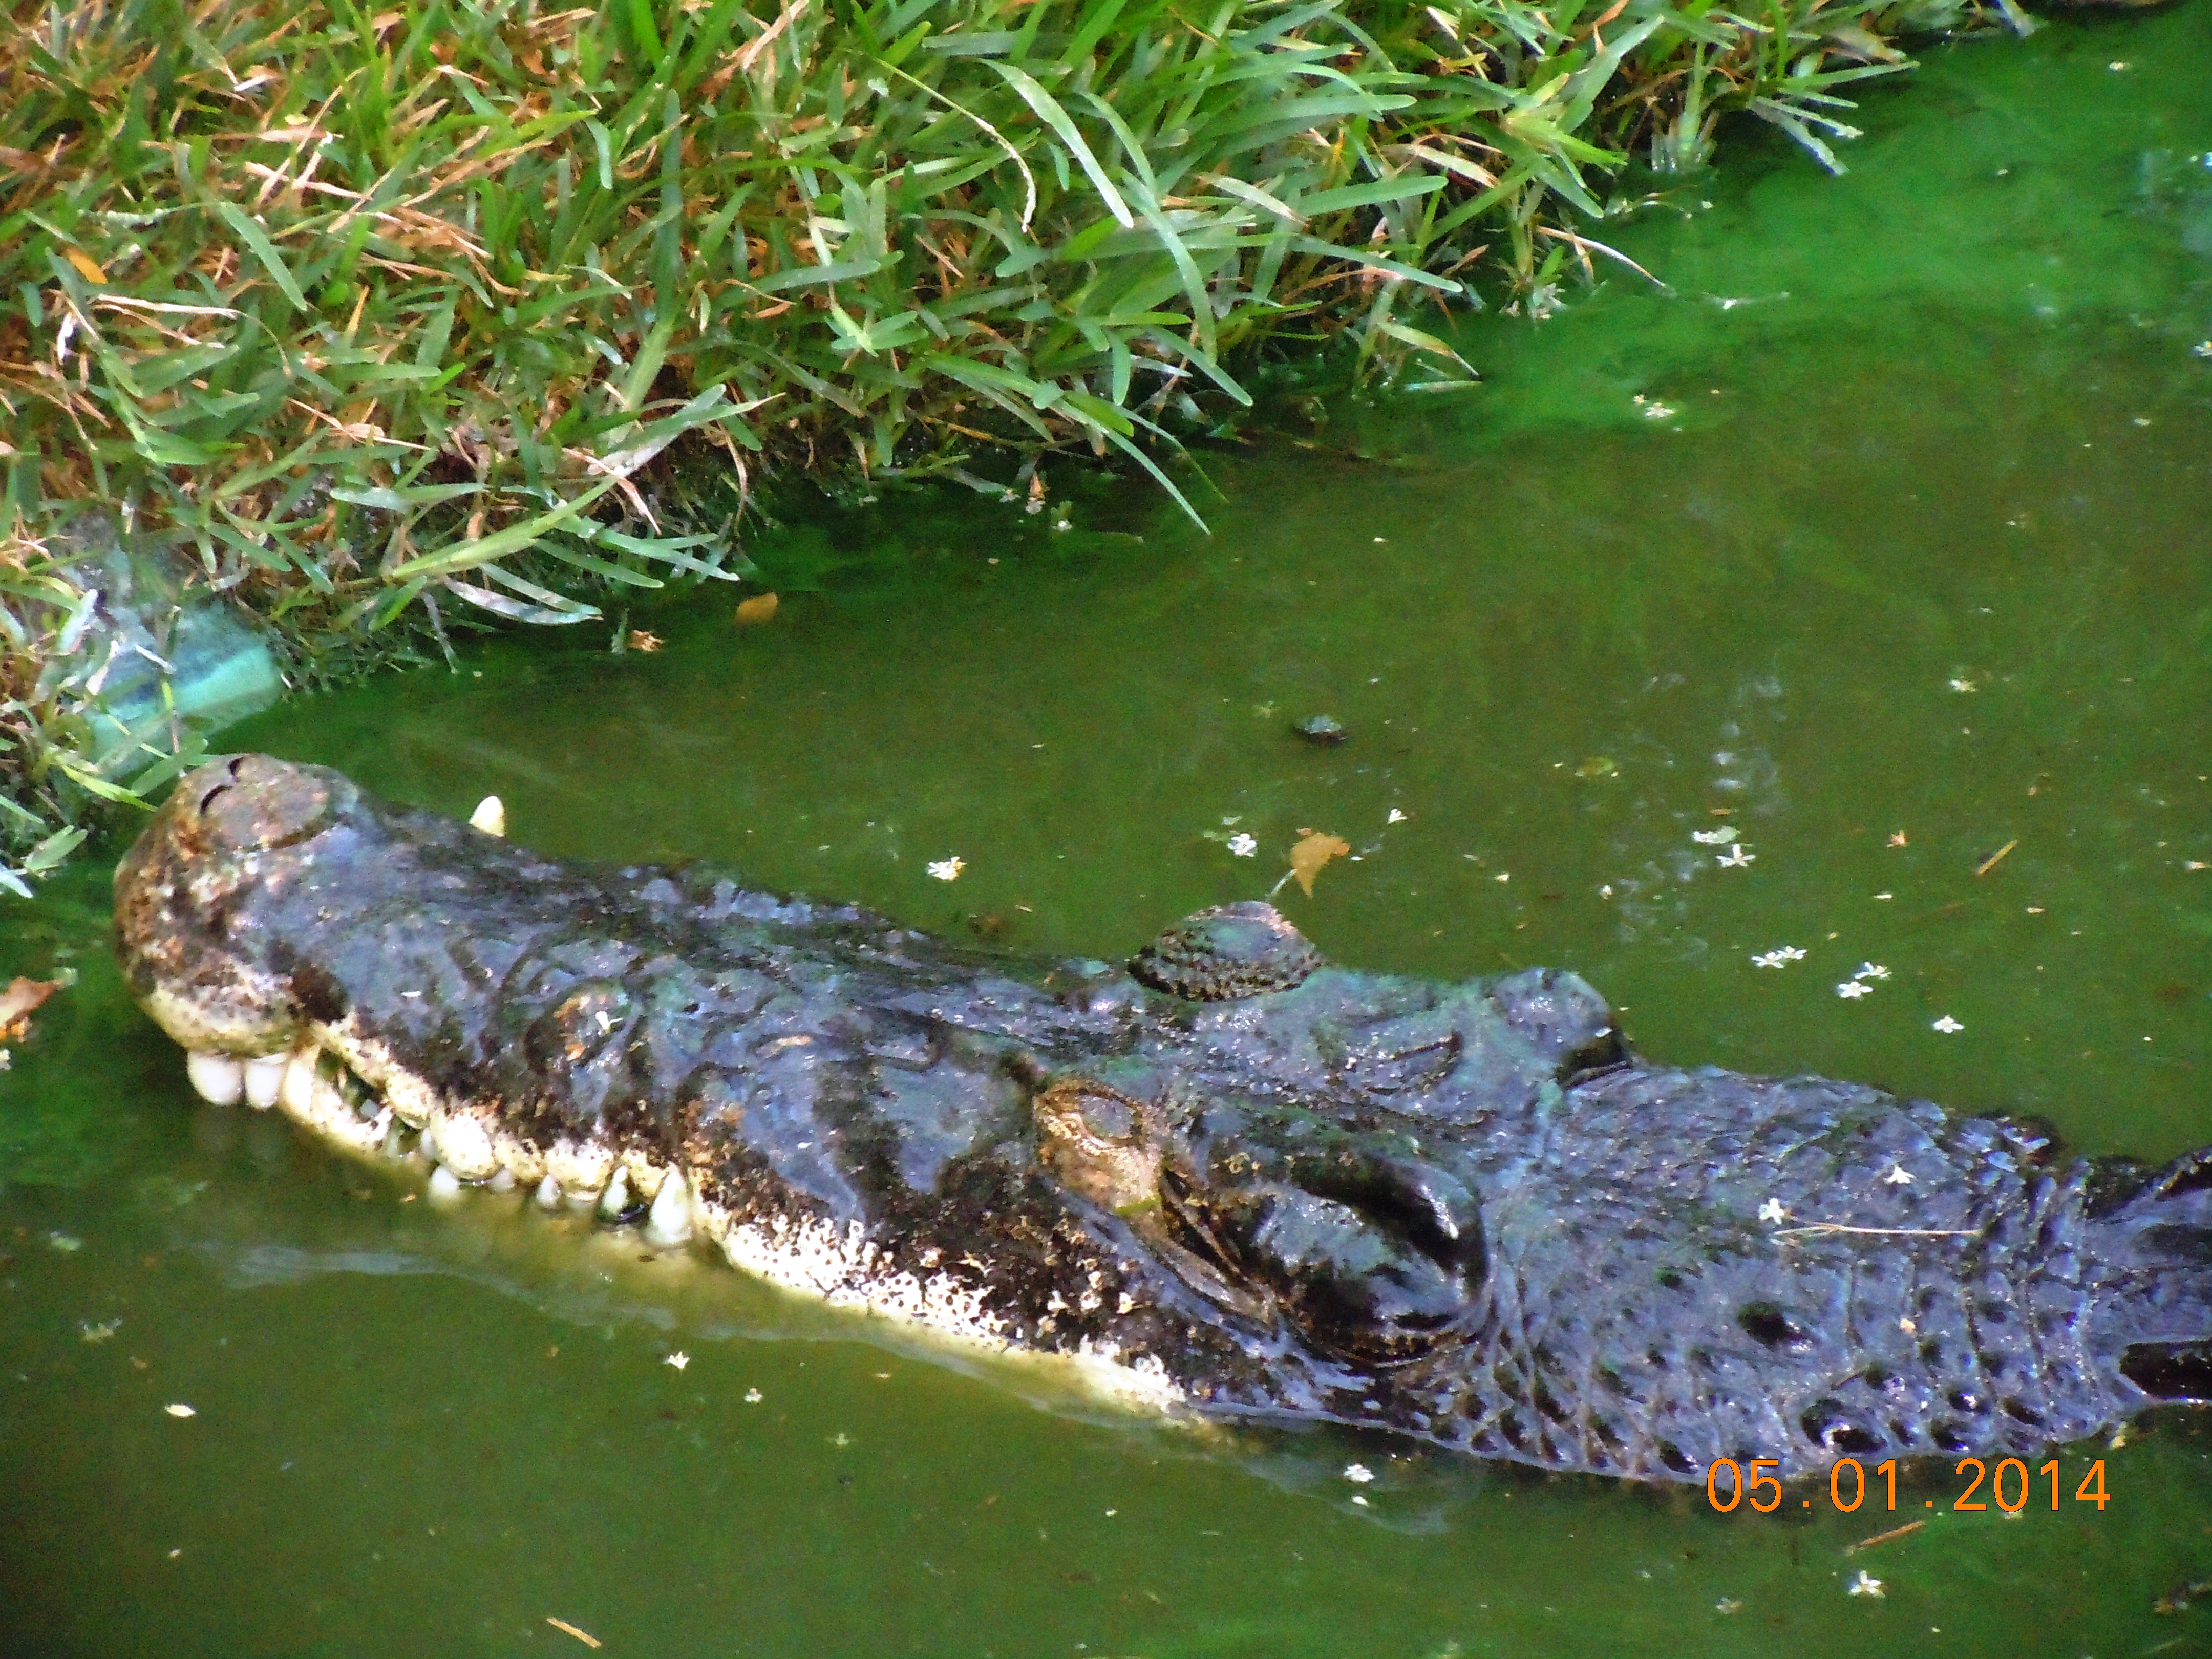 A close-up shows just how menacing a croc can be